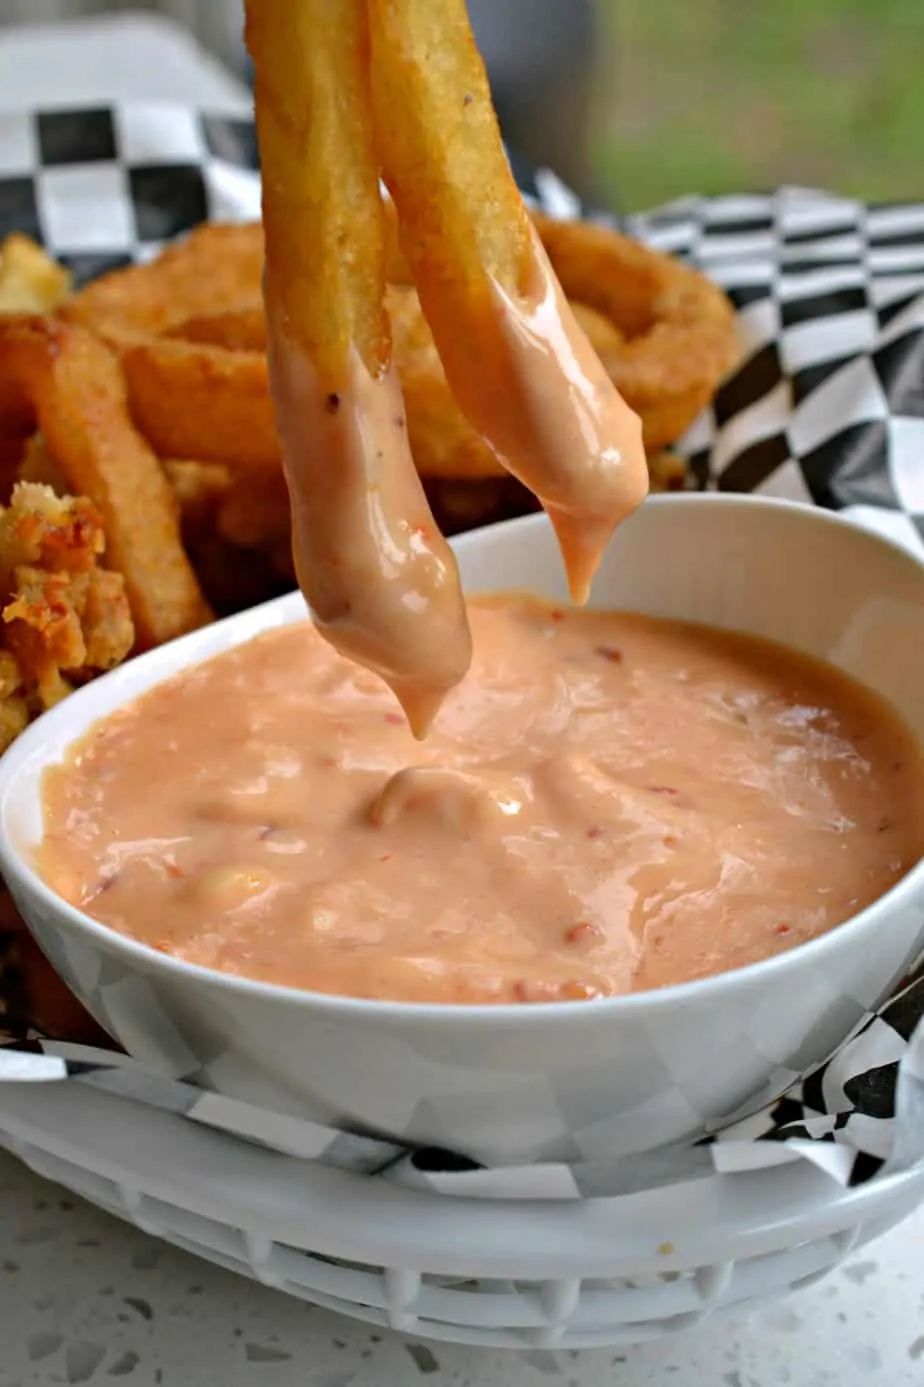 Boom Boom Sauce is a slightly spicy slightly sweet mayonnaise based chili sauce.